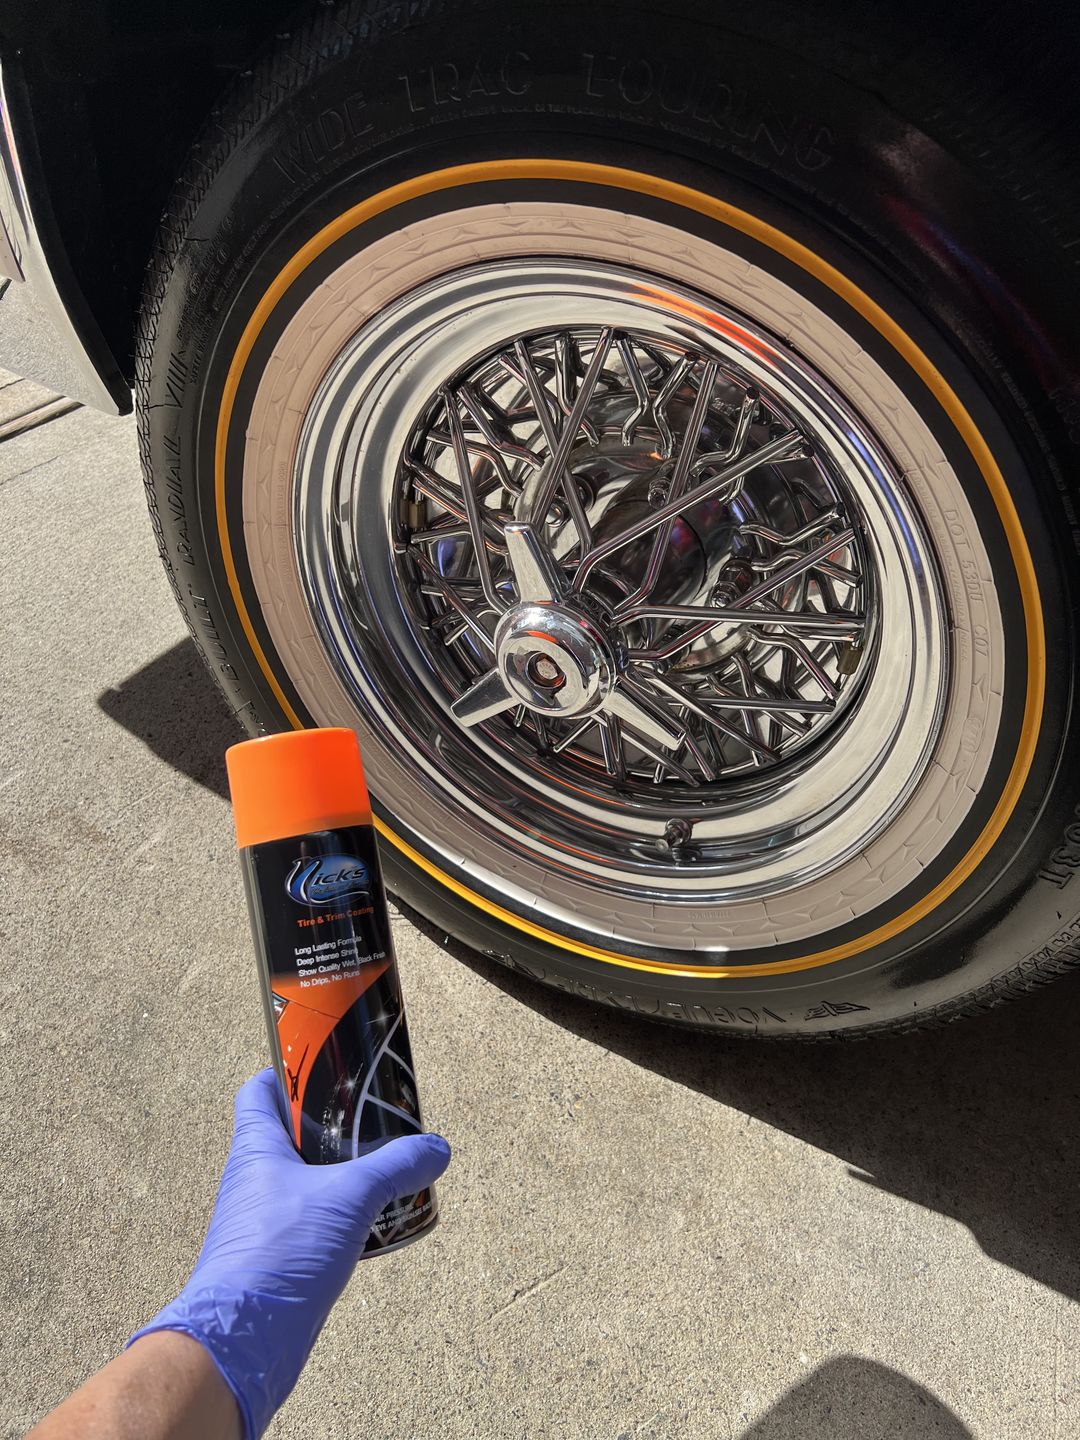 PRODUCT TEST: Nicks Tire and Trim Coating - 8 DAY UPDATE 